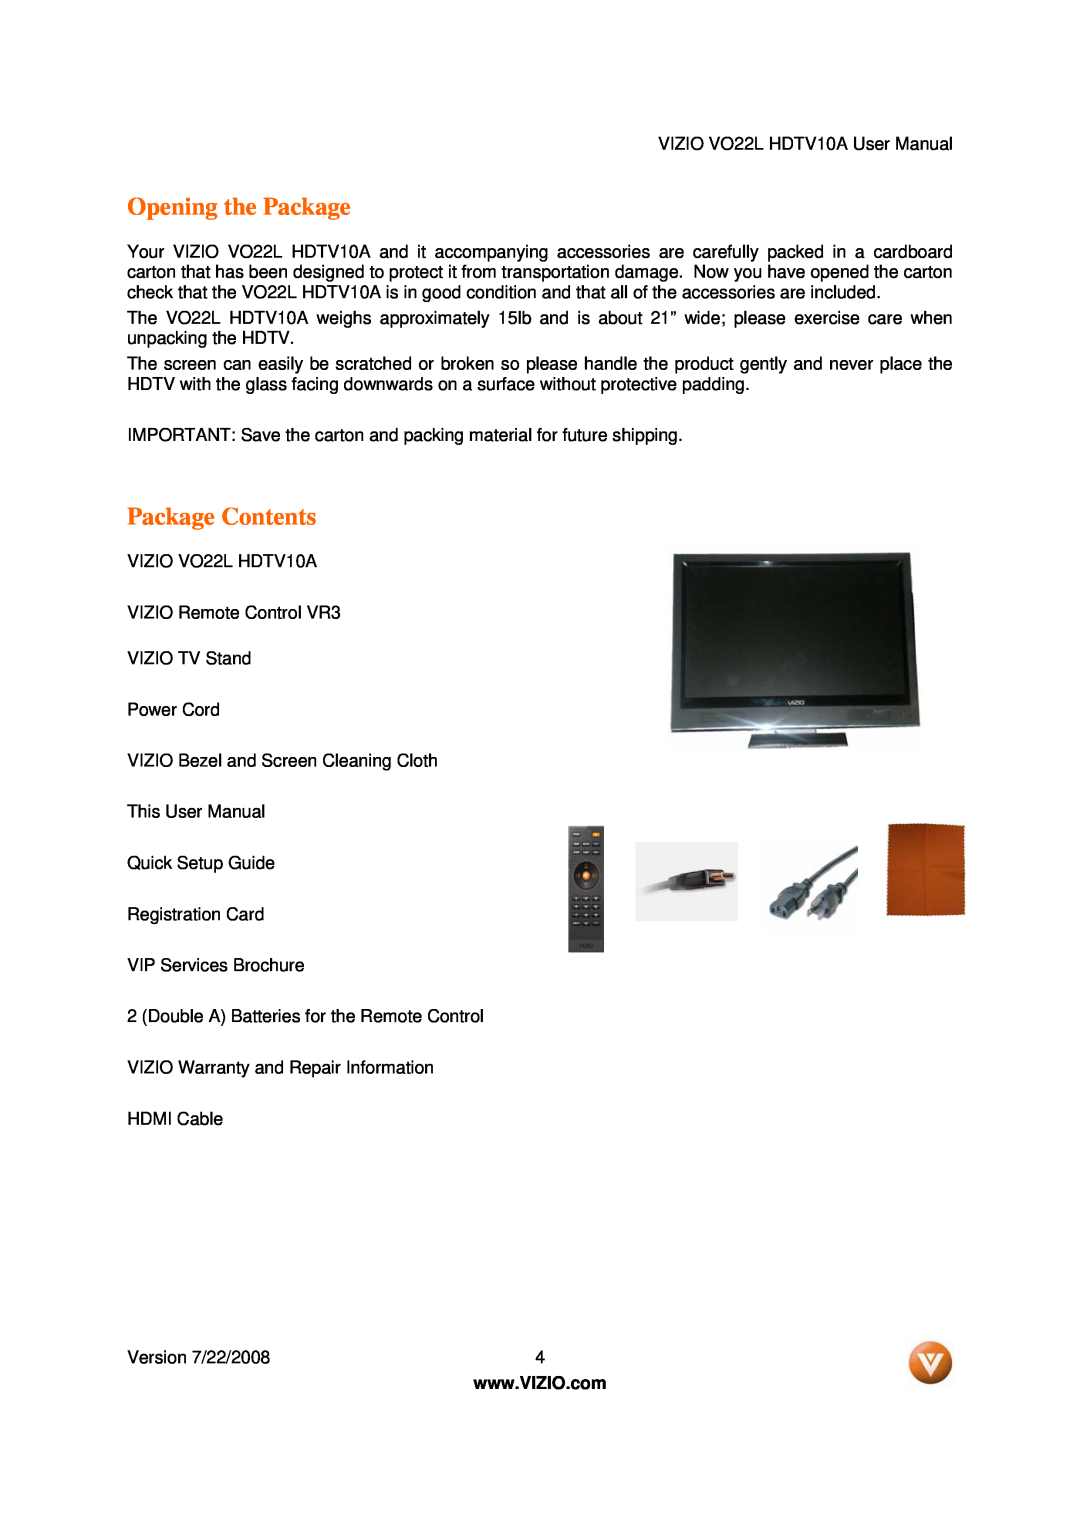 Vizio VO22L user manual Opening the Package, Package Contents 